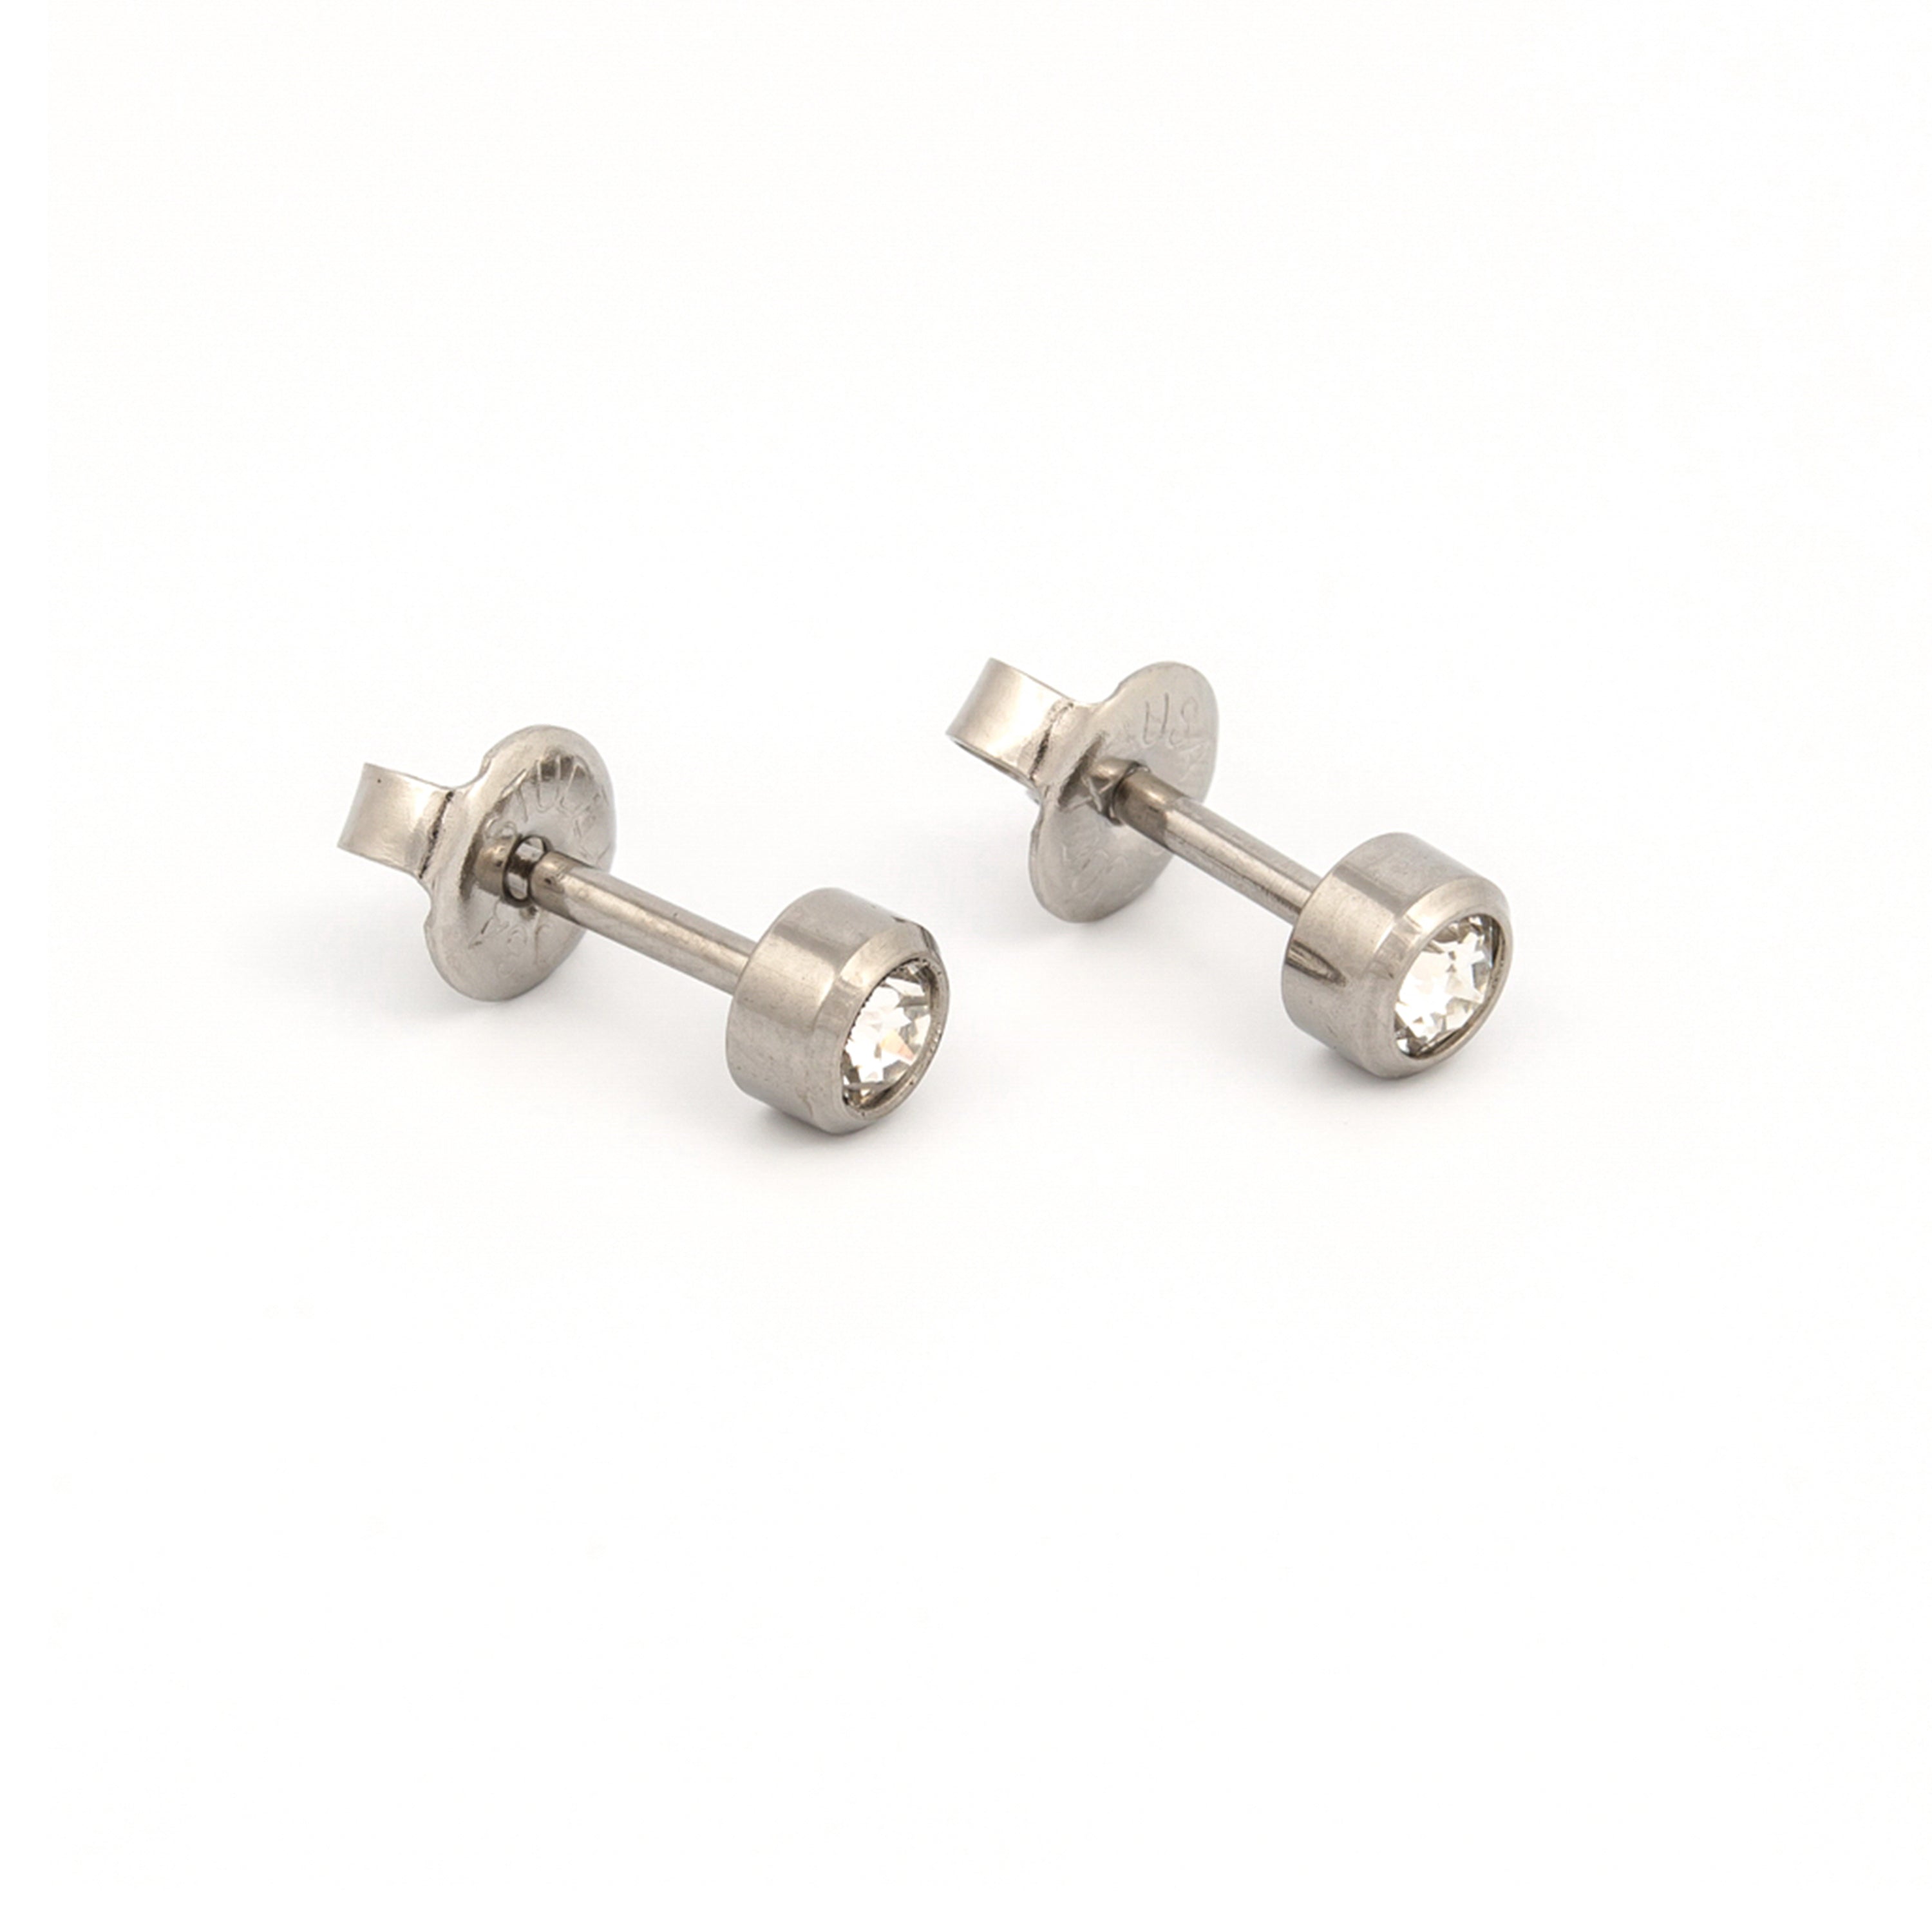 2MM April – Crystal Bezel Allergy free Stainless Steel Ear Studs | MADE IN USA | Ideal for everyday wear